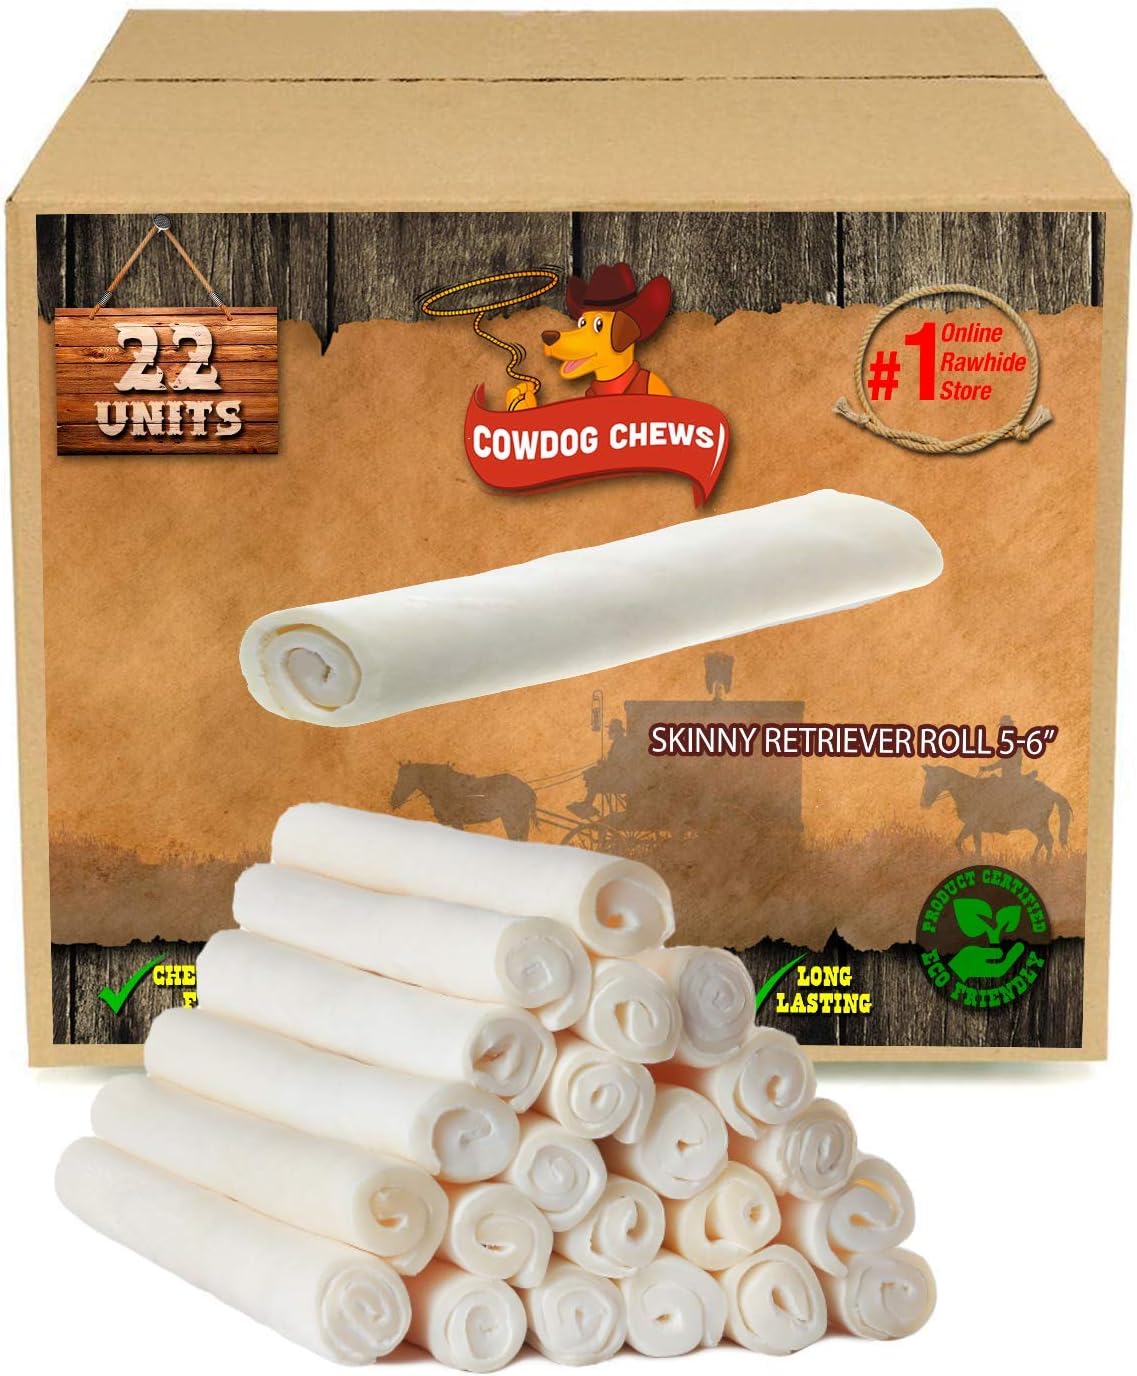 5-6 Inches Rawhide Retriever Roll - Chewing Dog Treat, 100% Natural - Natural Grass Fed Livestock Sourced (22 Pack)